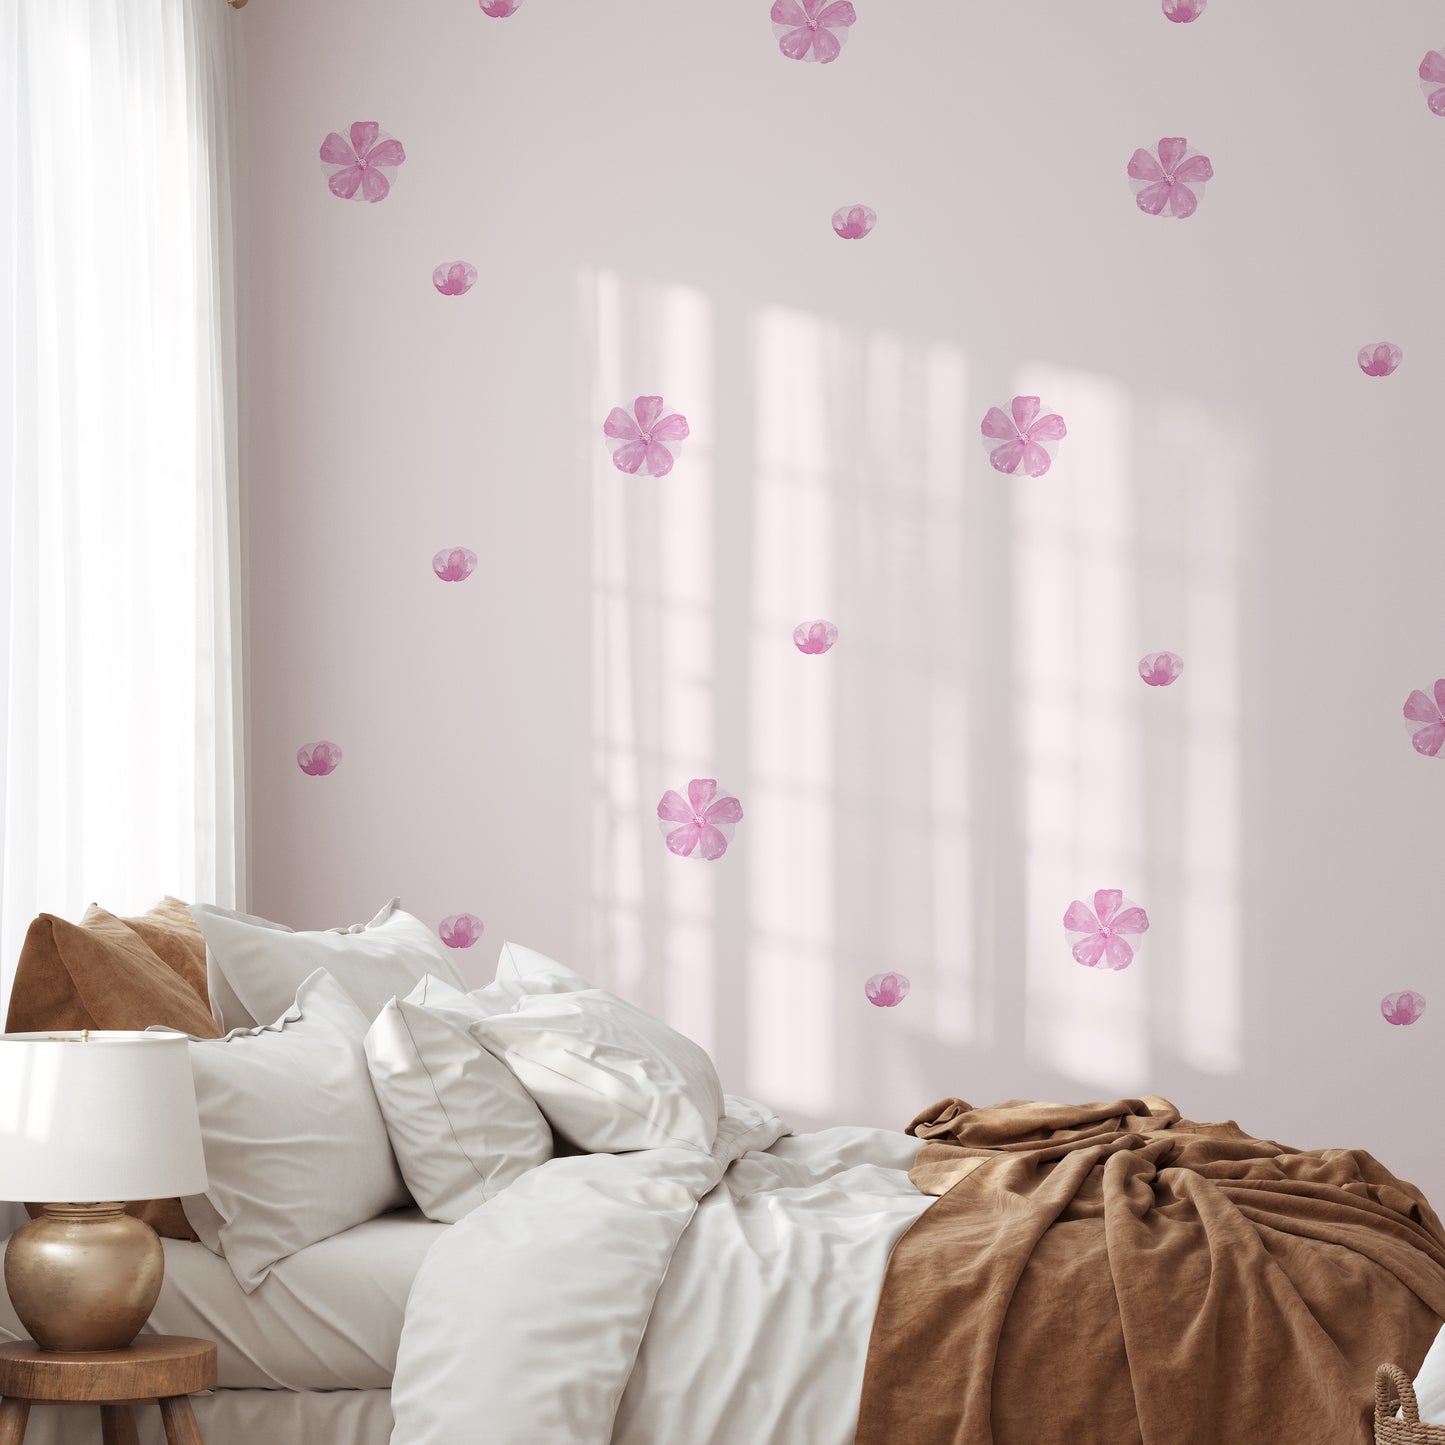 Watercolour pink flowers | Fabric wall stickers